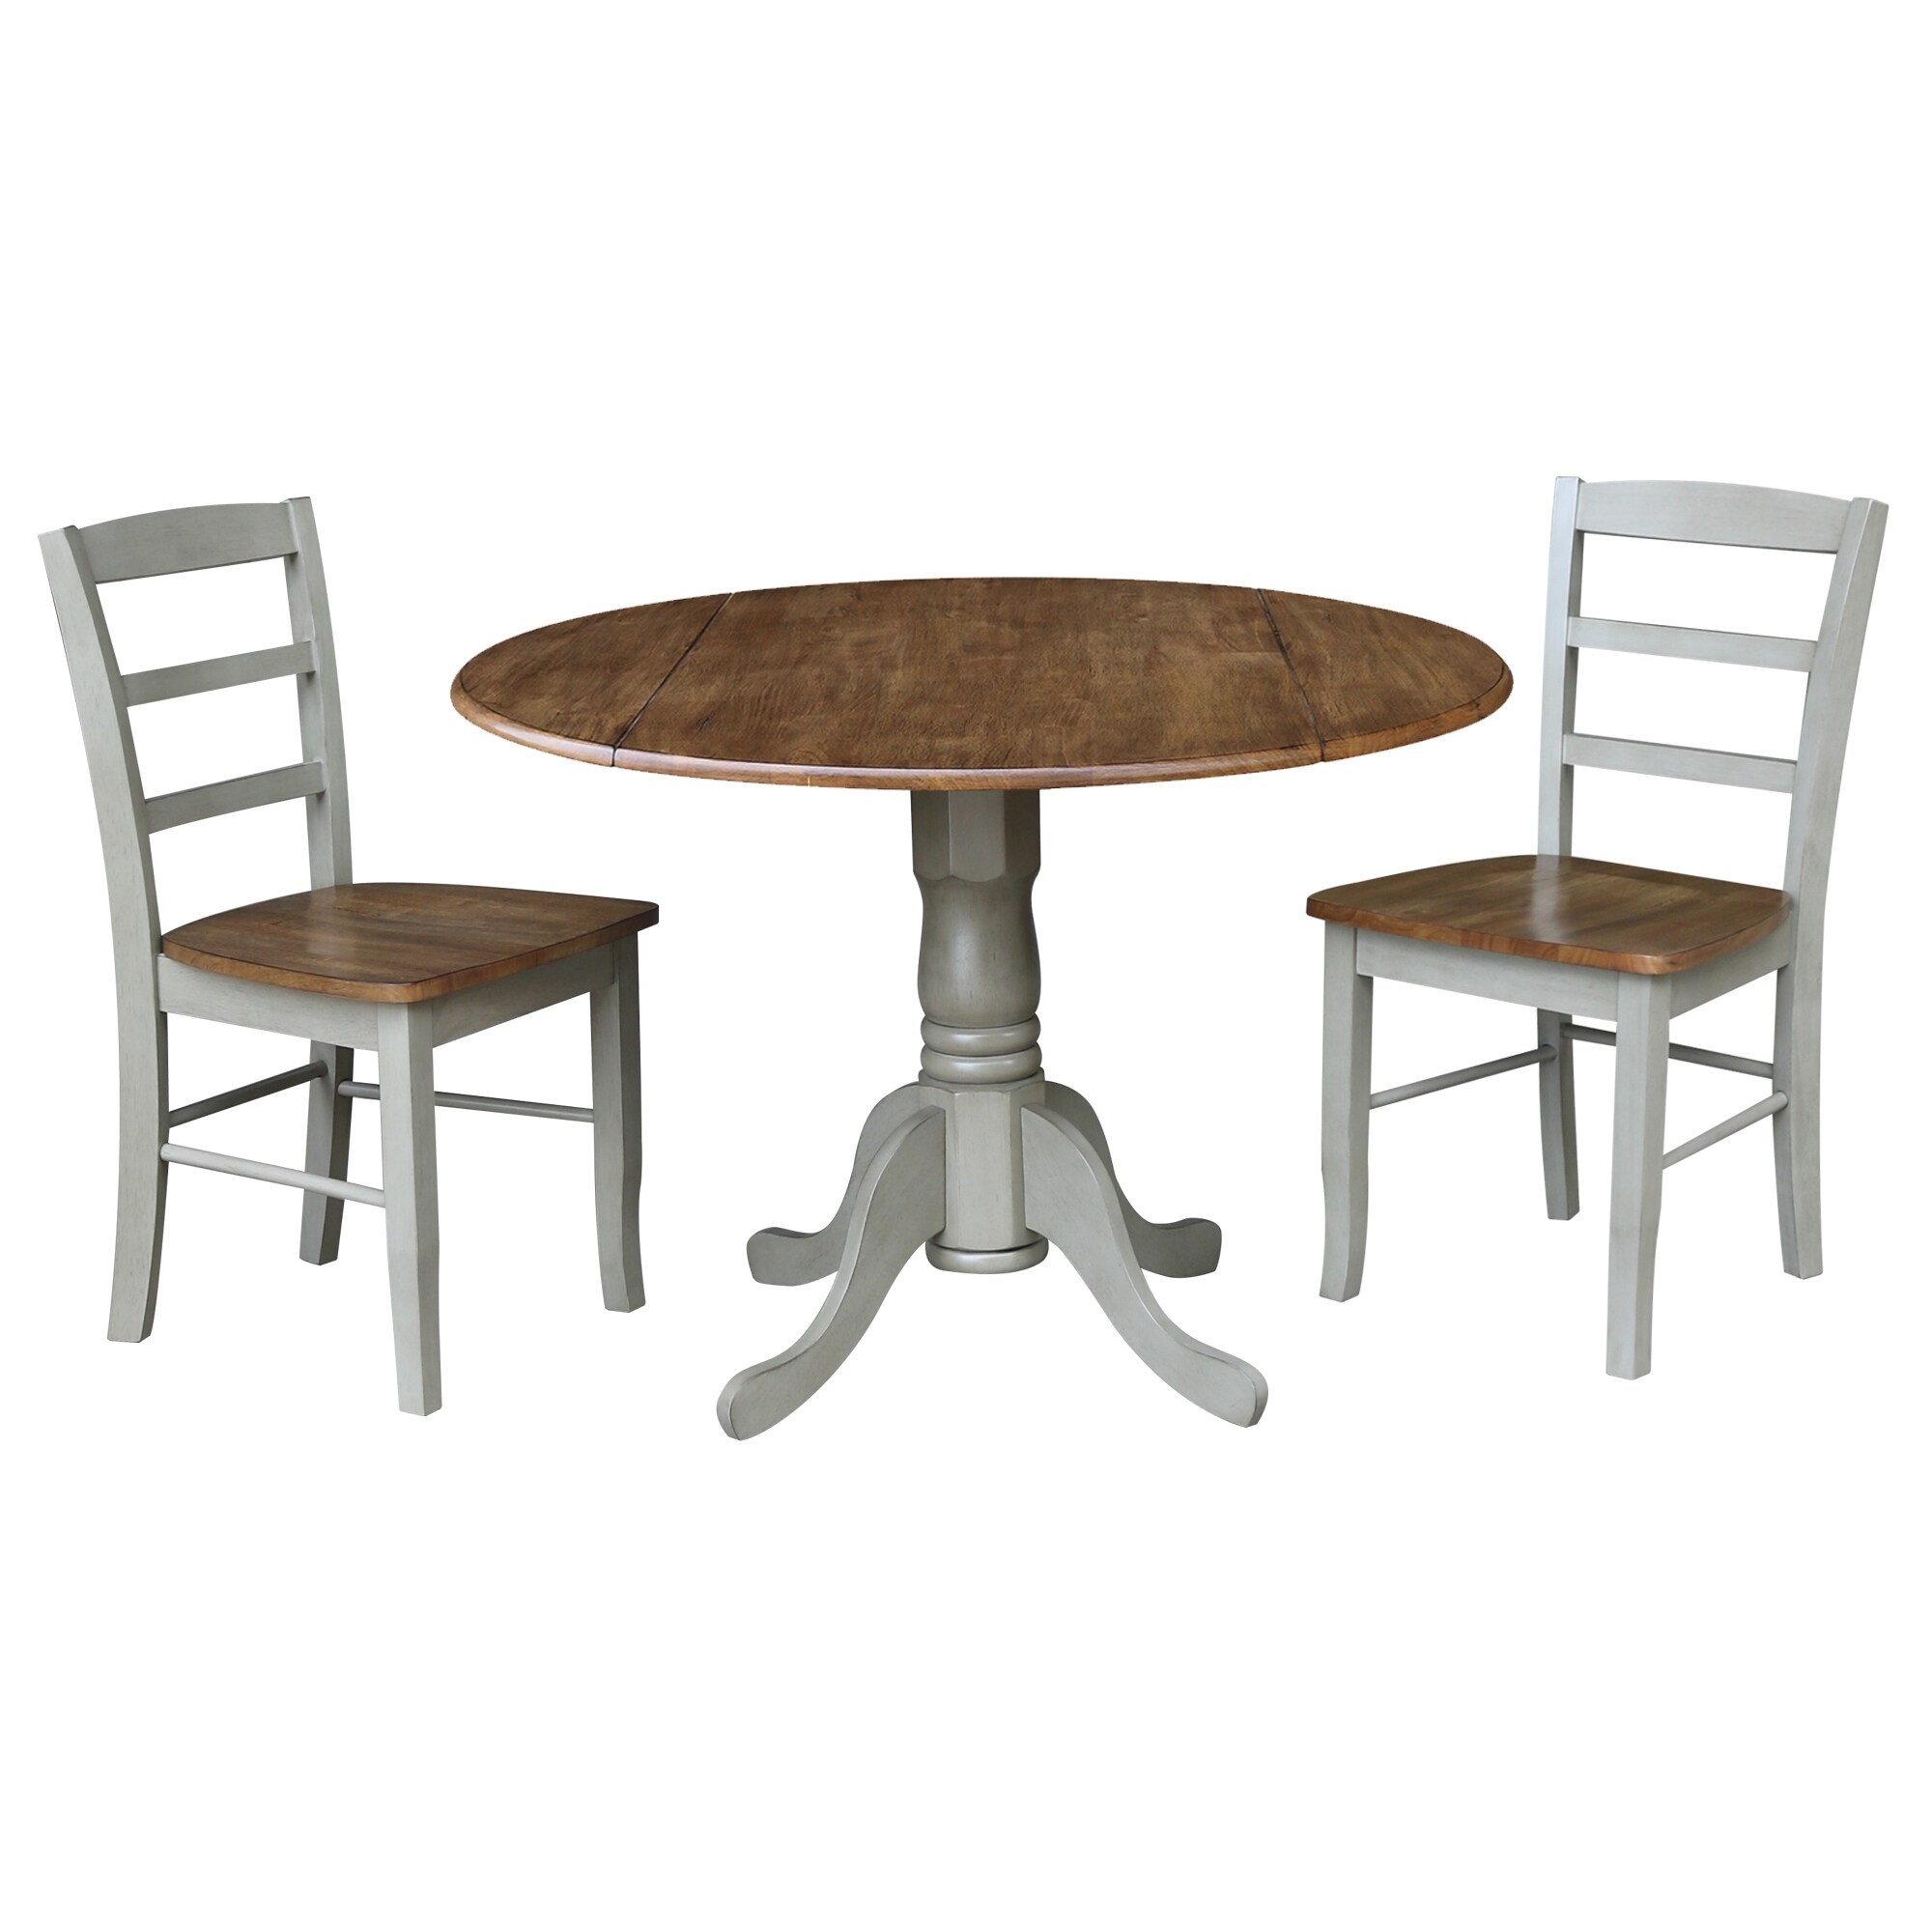 42" Dual Drop Leaf Pedestal Dining Table With 2 Madrid Ladderback Chairs 3 Piece Dining Set